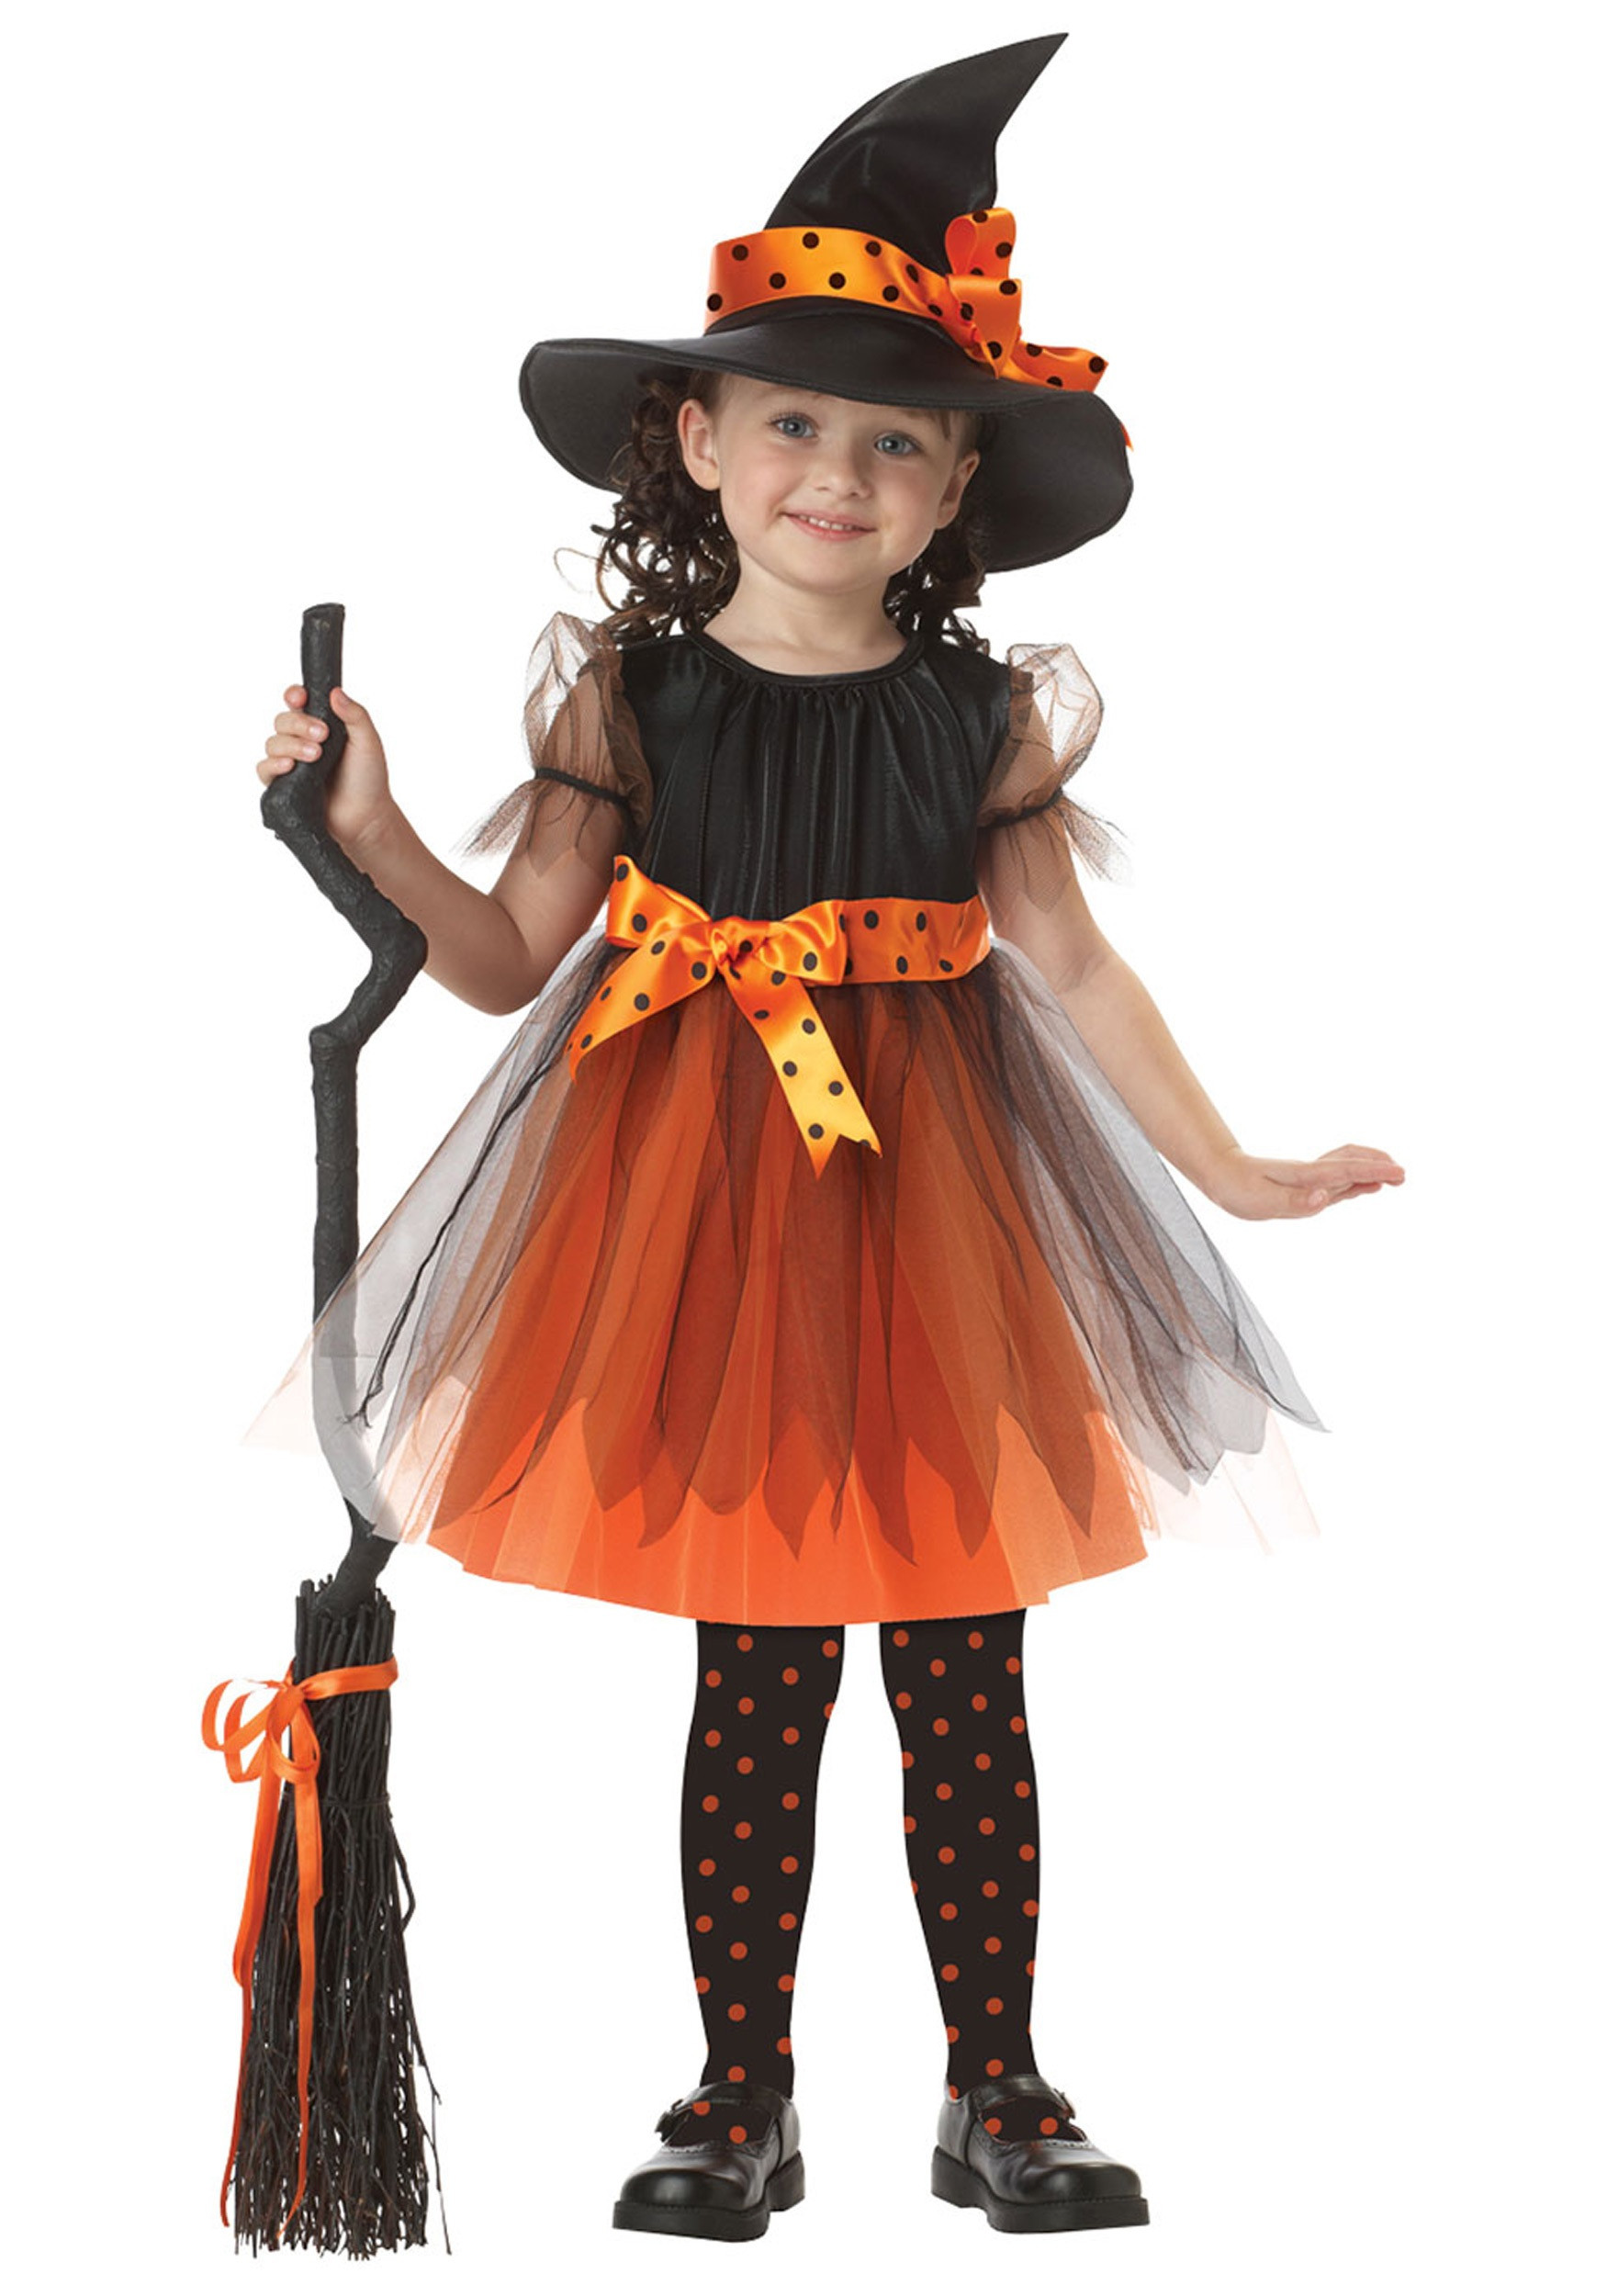 DIY Witch Costume For Kids
 35 HALLOWEEN COSTUME IDEAS FOR KIDS Godfather Style